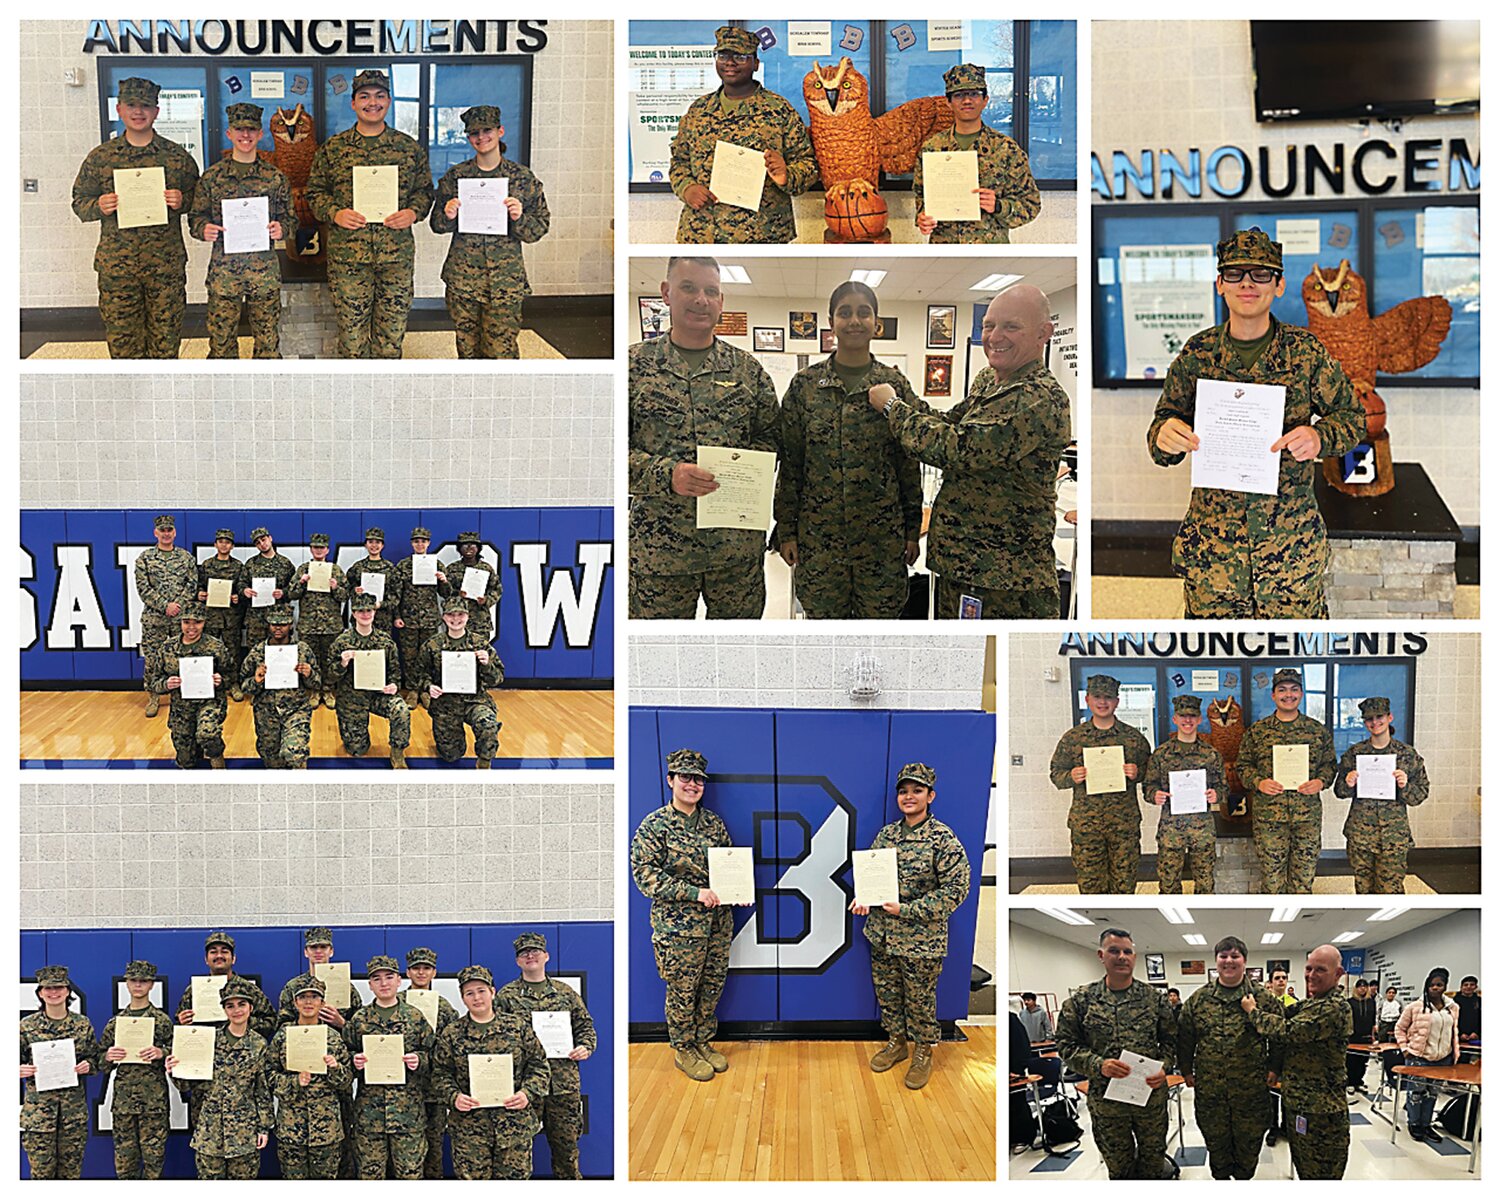 Several members of the Bensalem High School Marine Corps JROTC recently earned promotions.